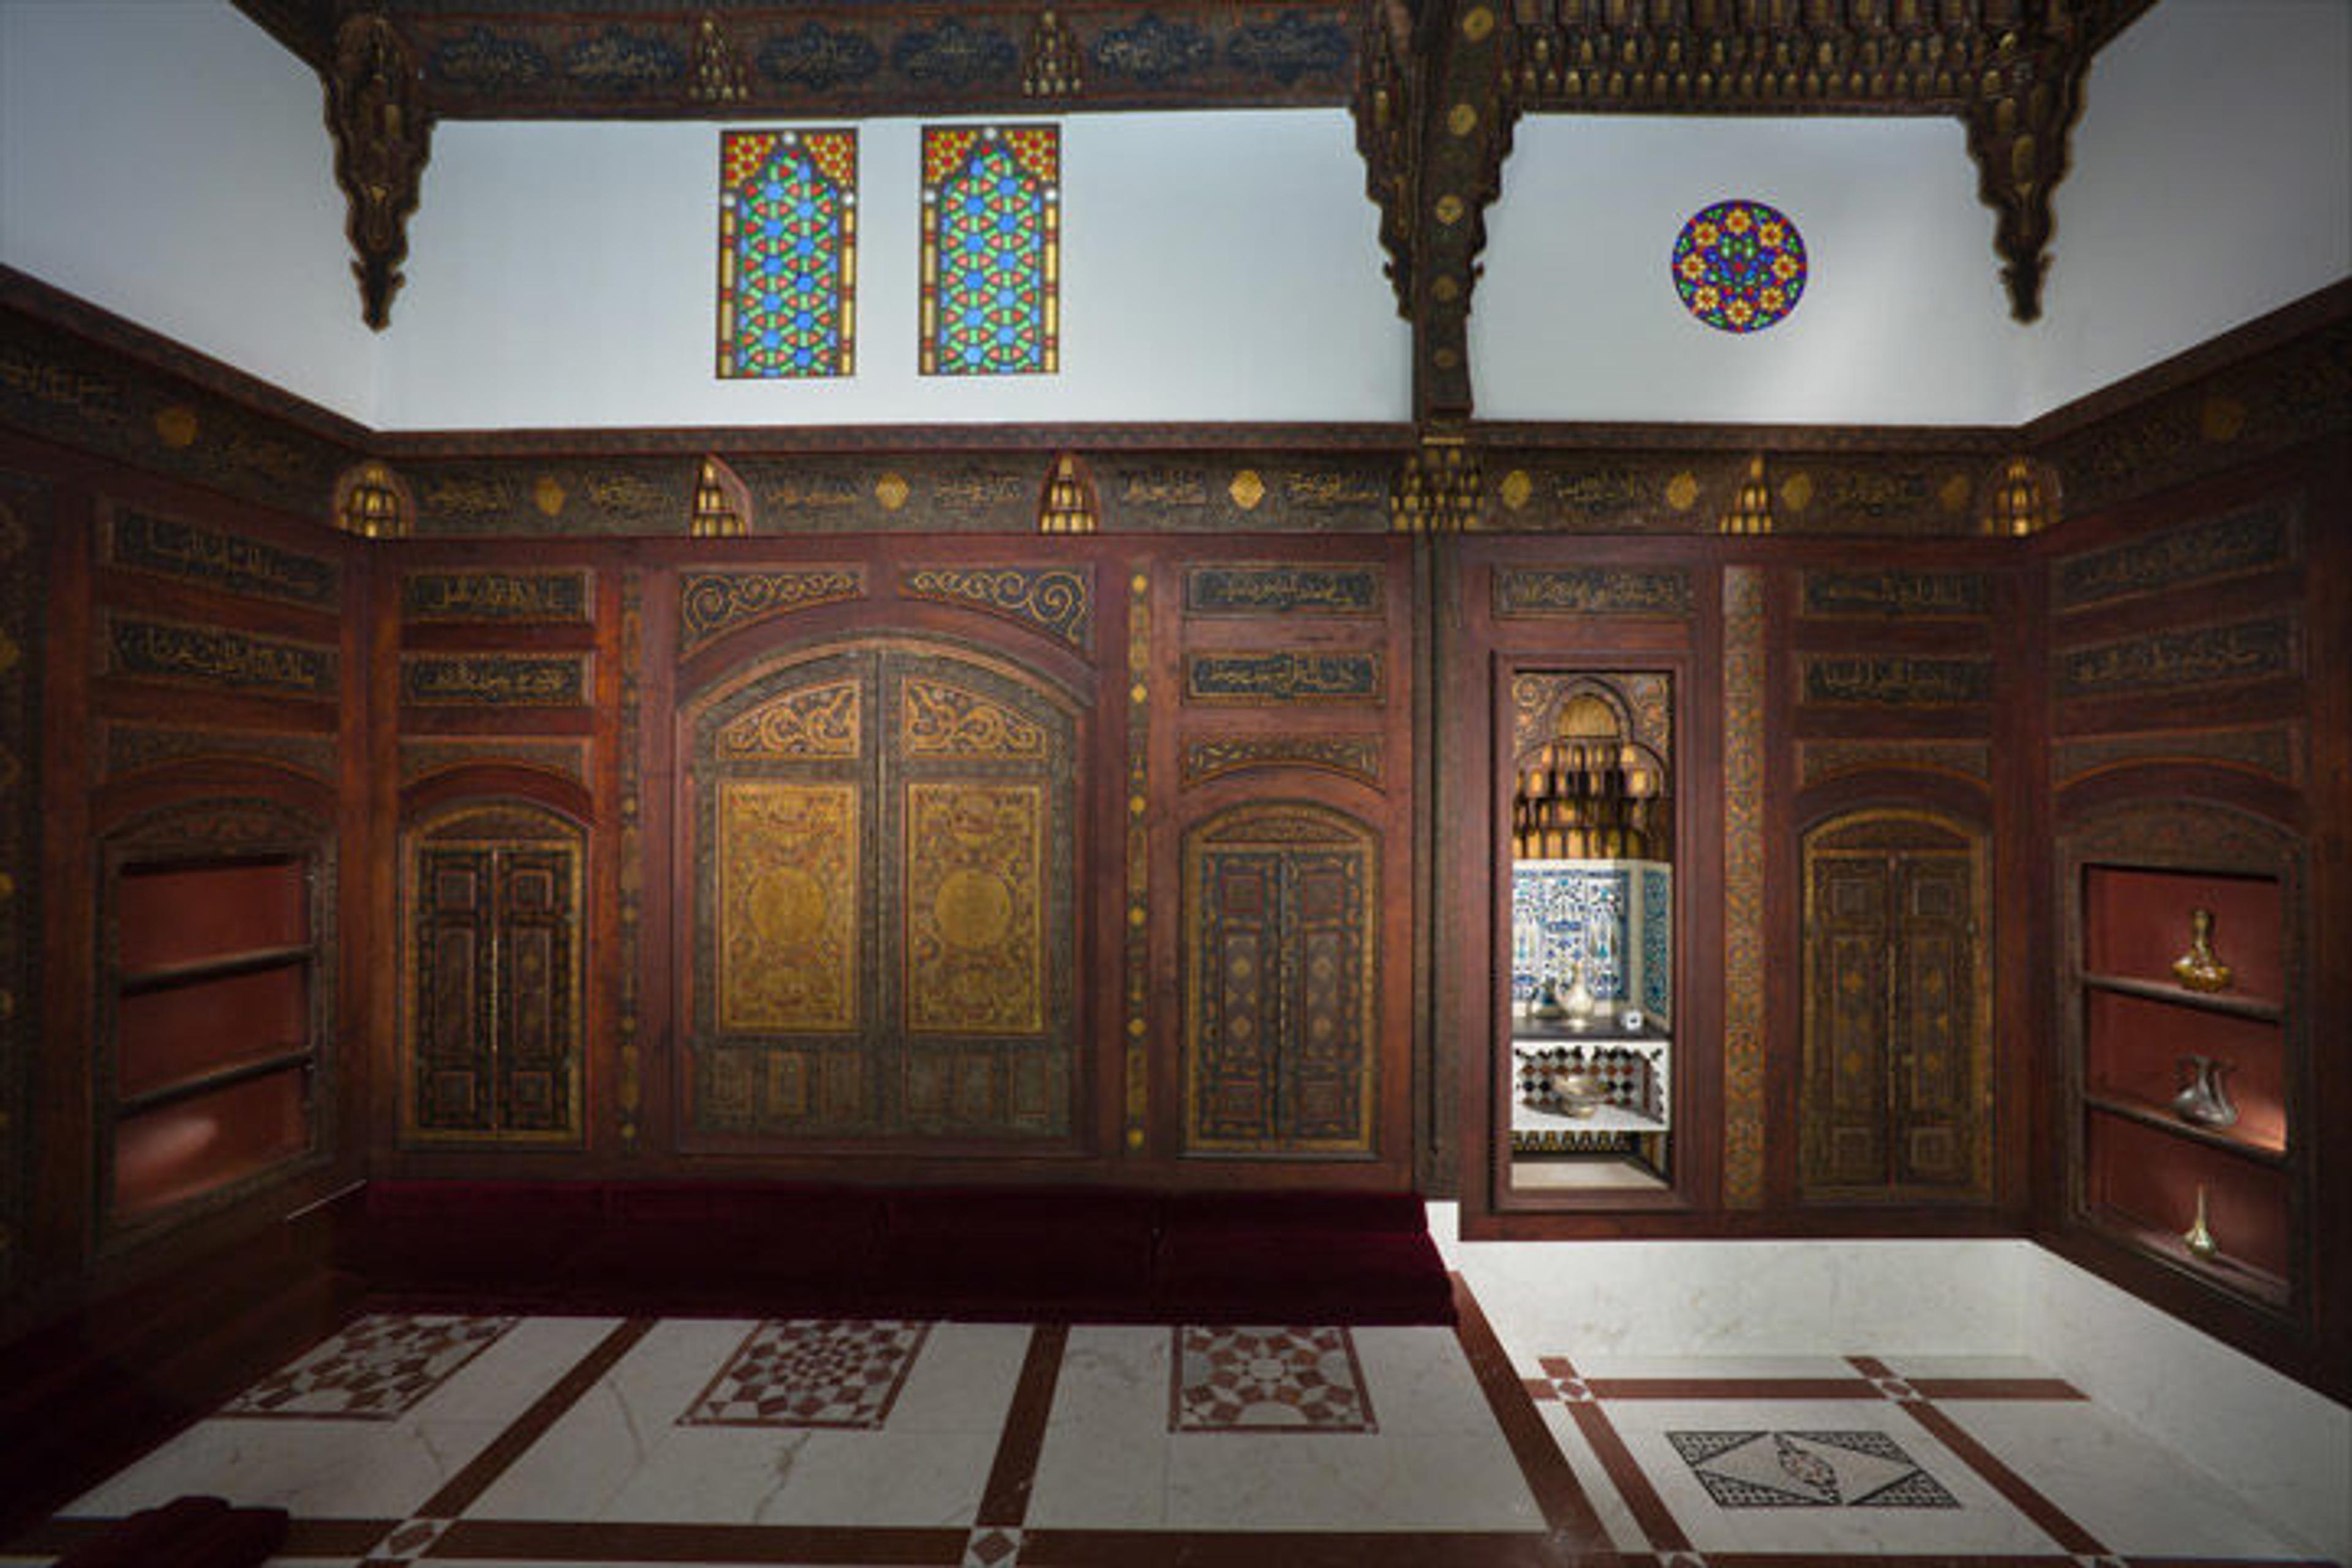 Detail view of paneled walls in the Damascus Room